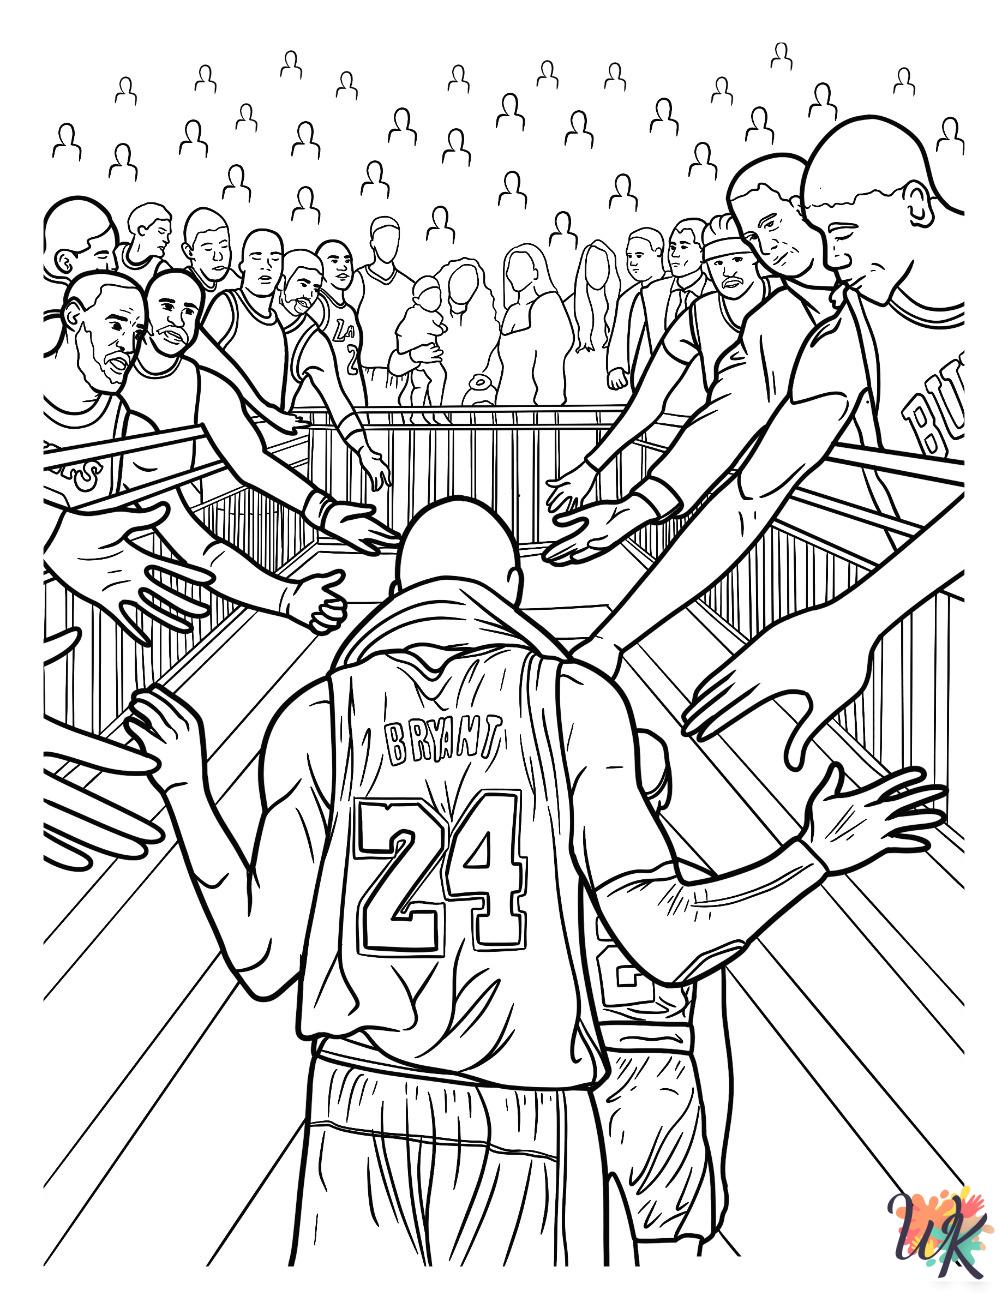 Kobe Bryant coloring pages for adults easy